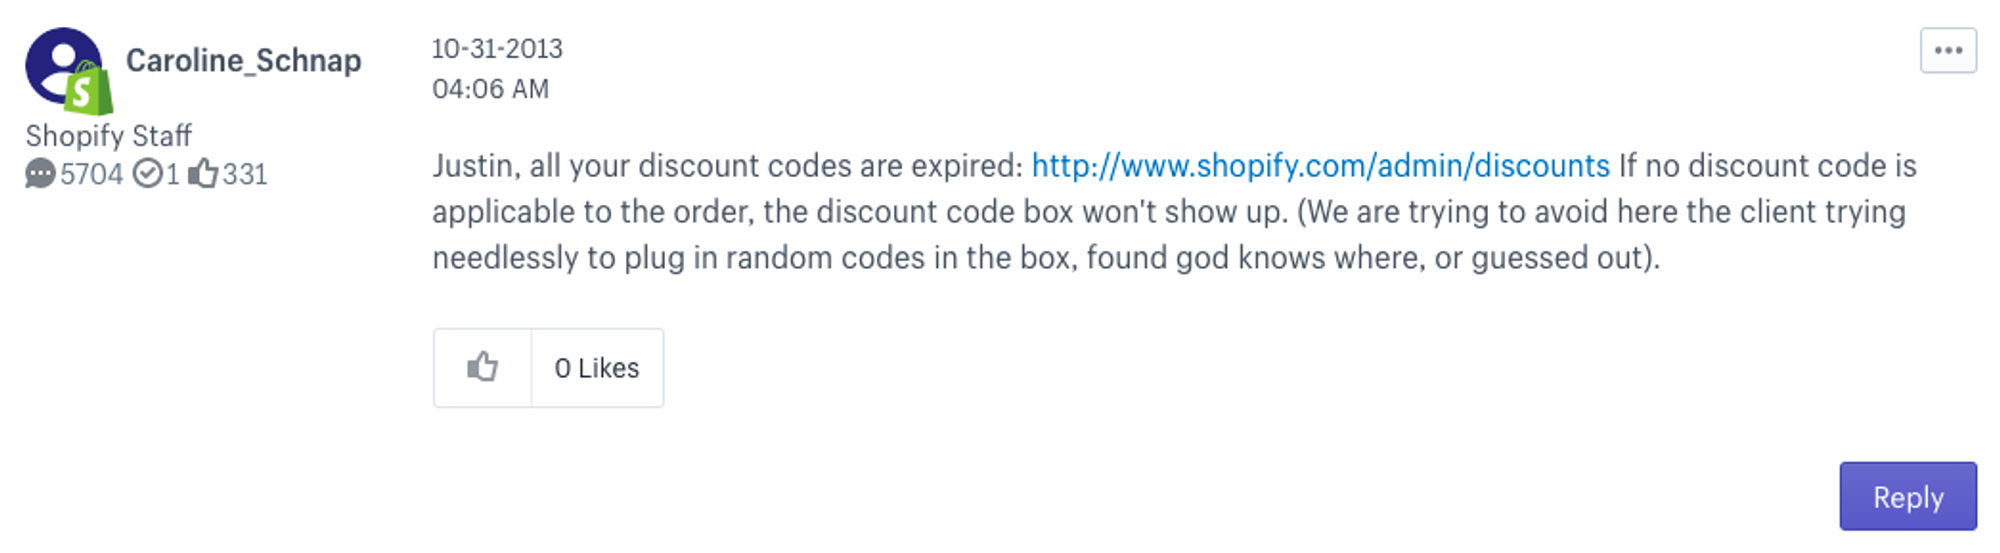 Response from the Shopify Staff about discount code box visibility on the checkout page